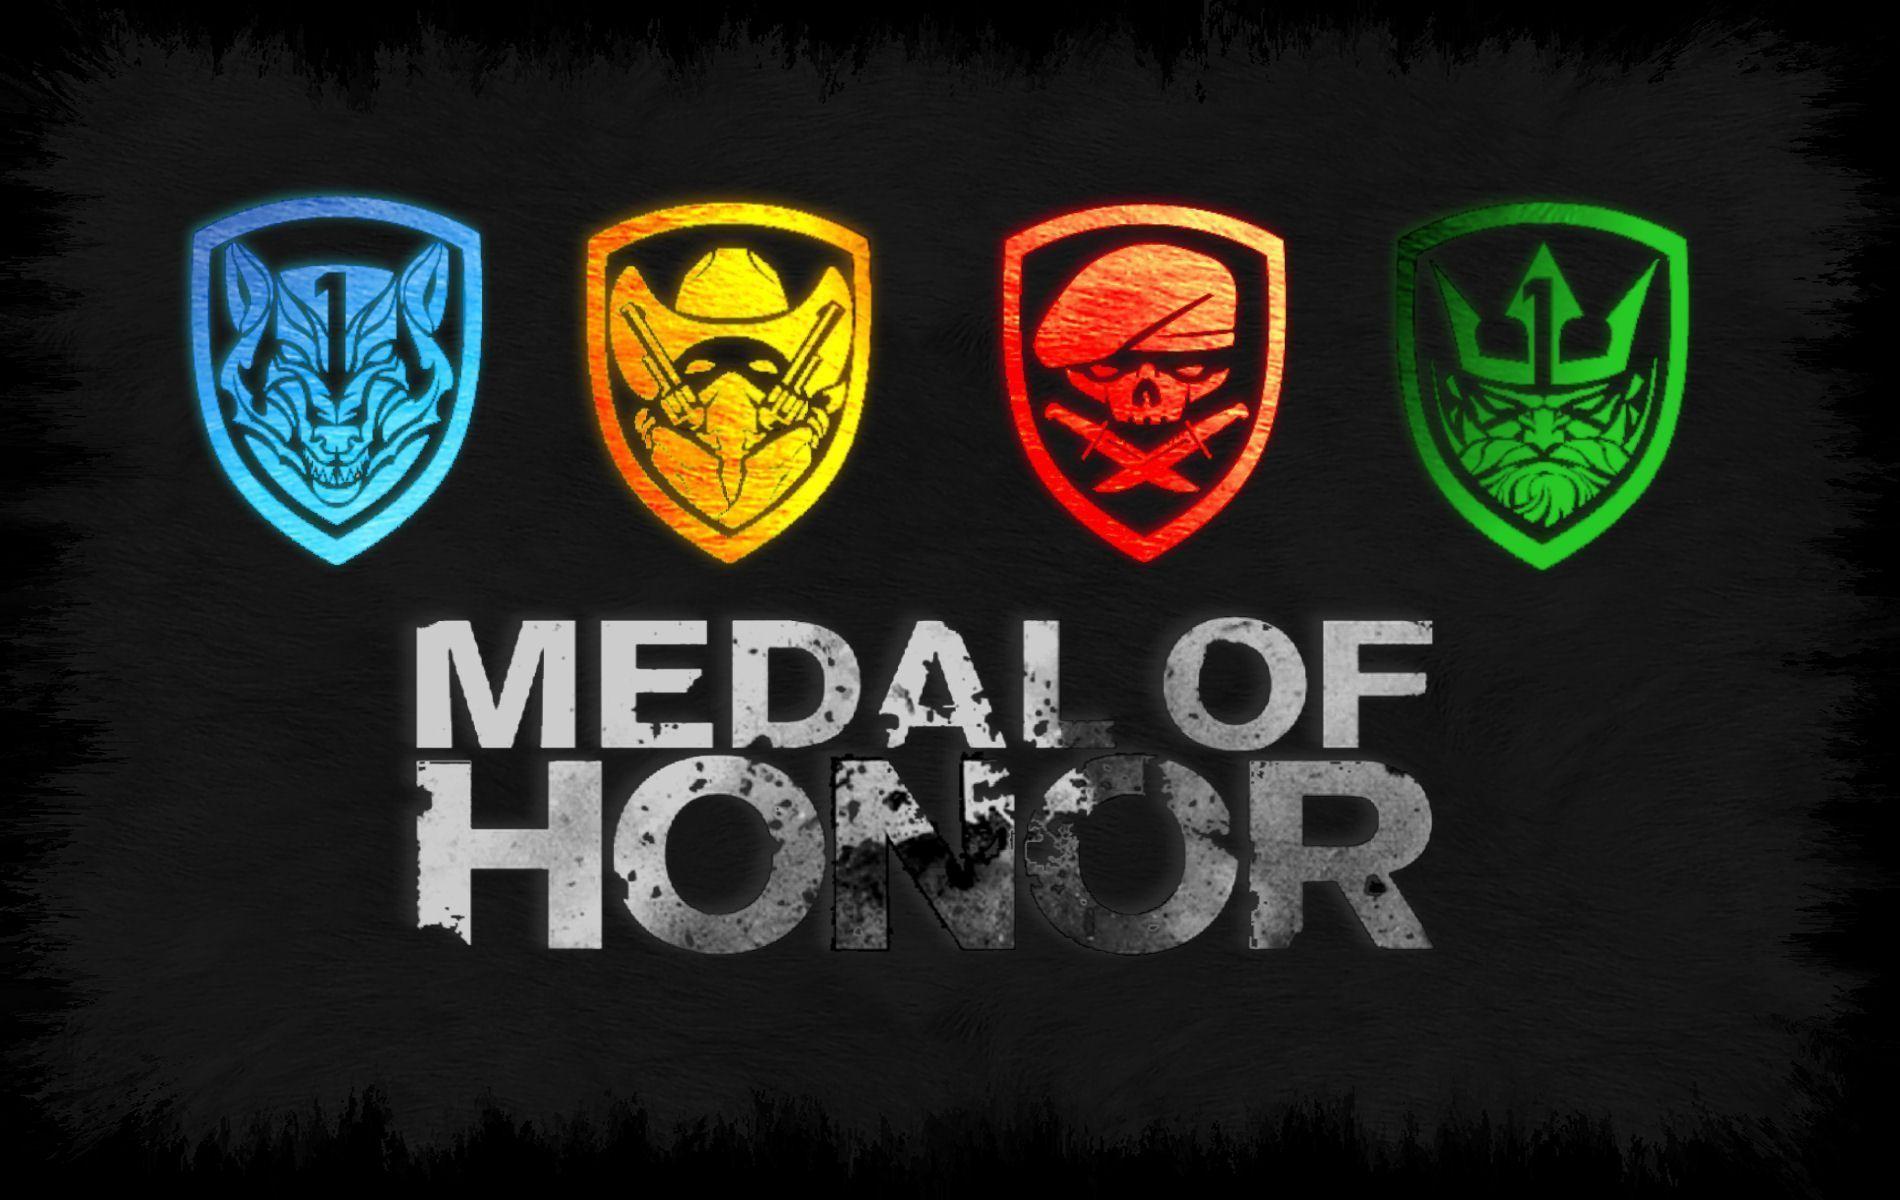 Medal of Honor Wallpapers III by Midhgardhsorm